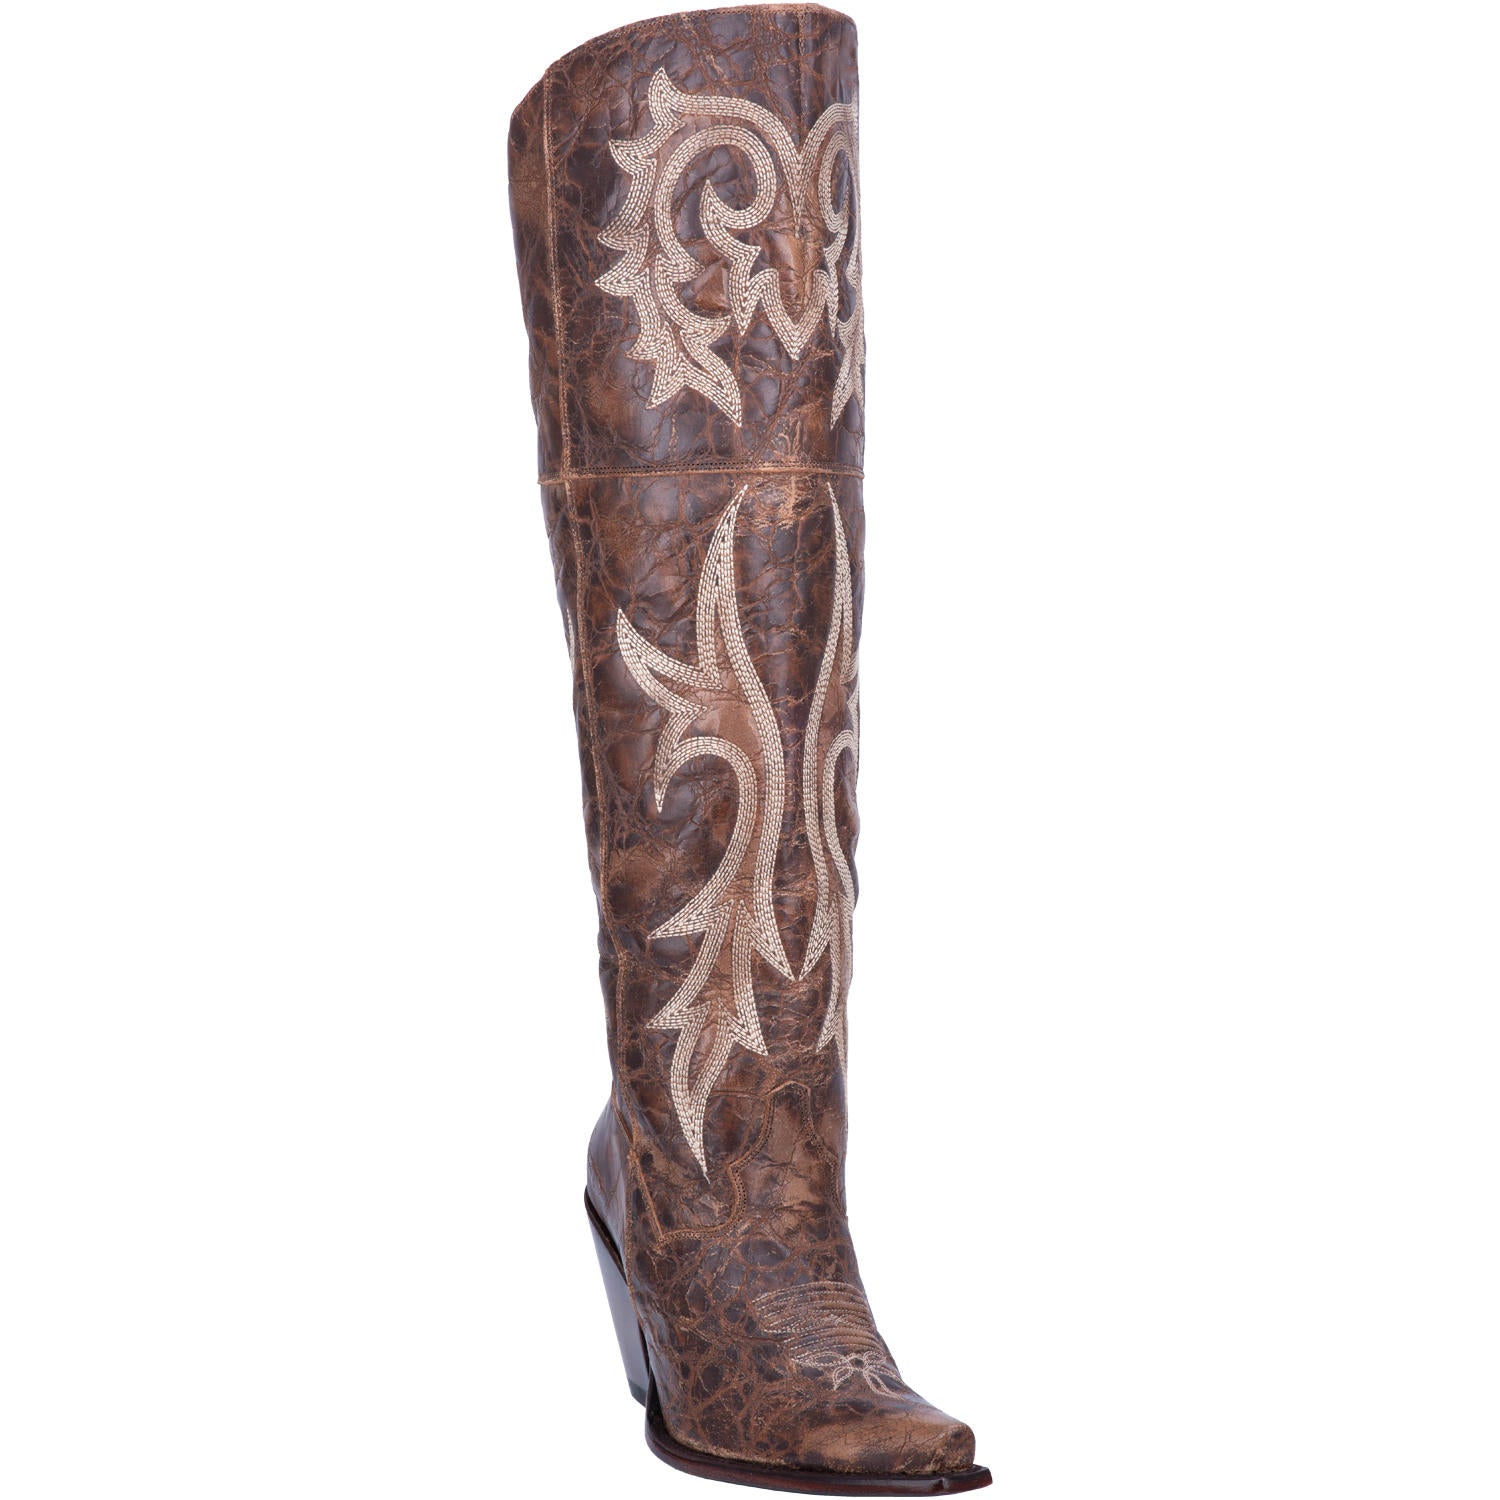 Jilted Distressed Embroidered Brown Leather Over The Knee High Boots (DS)